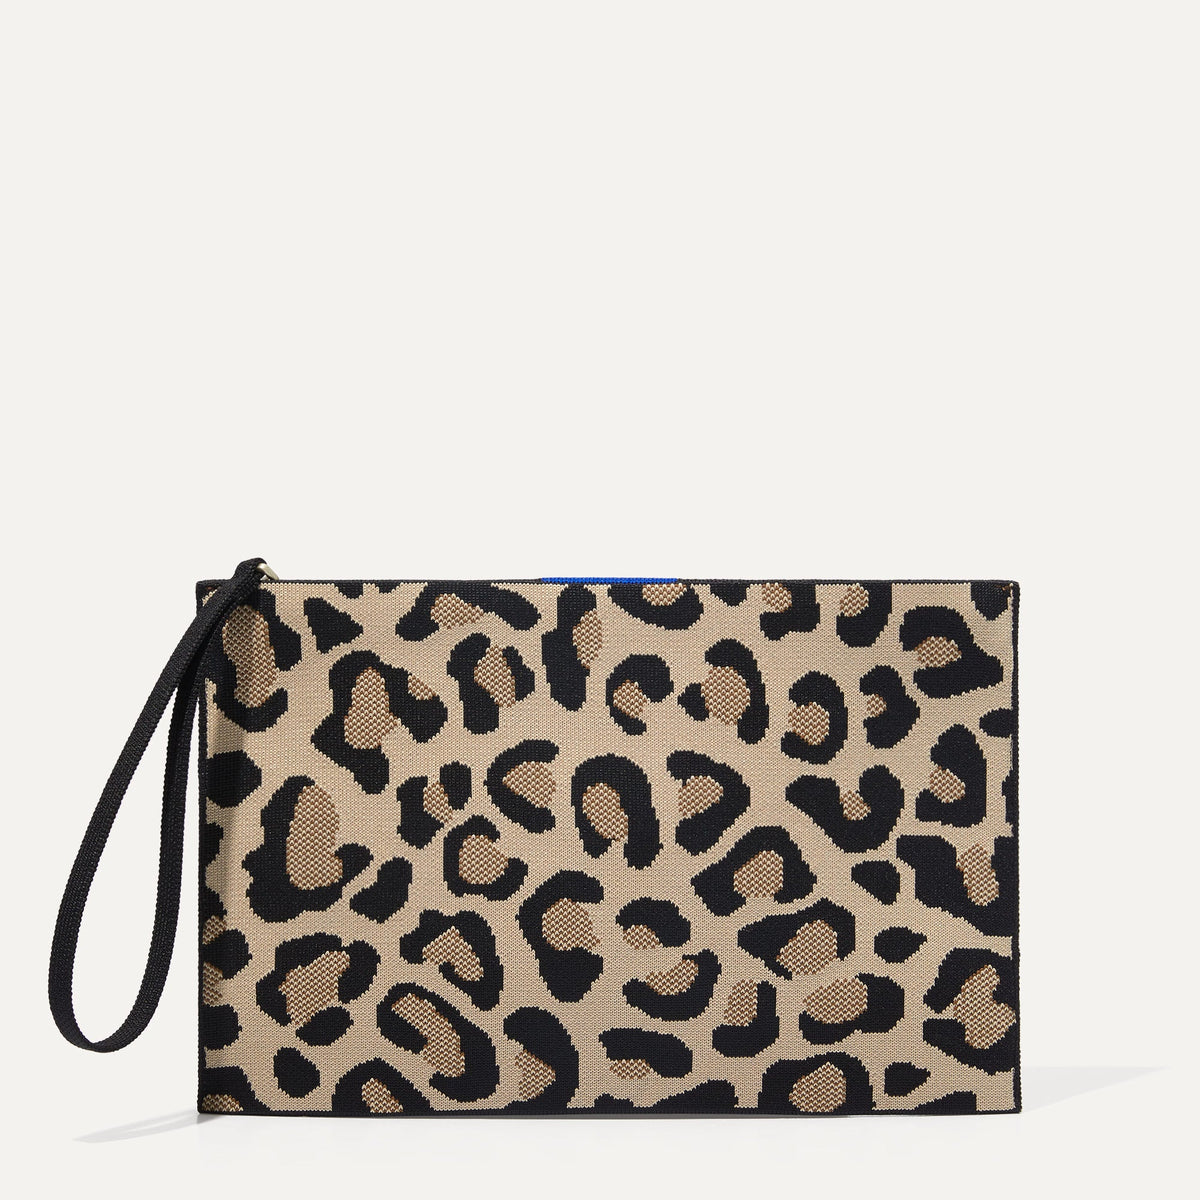 Rothy's - The Wallet Wristlet